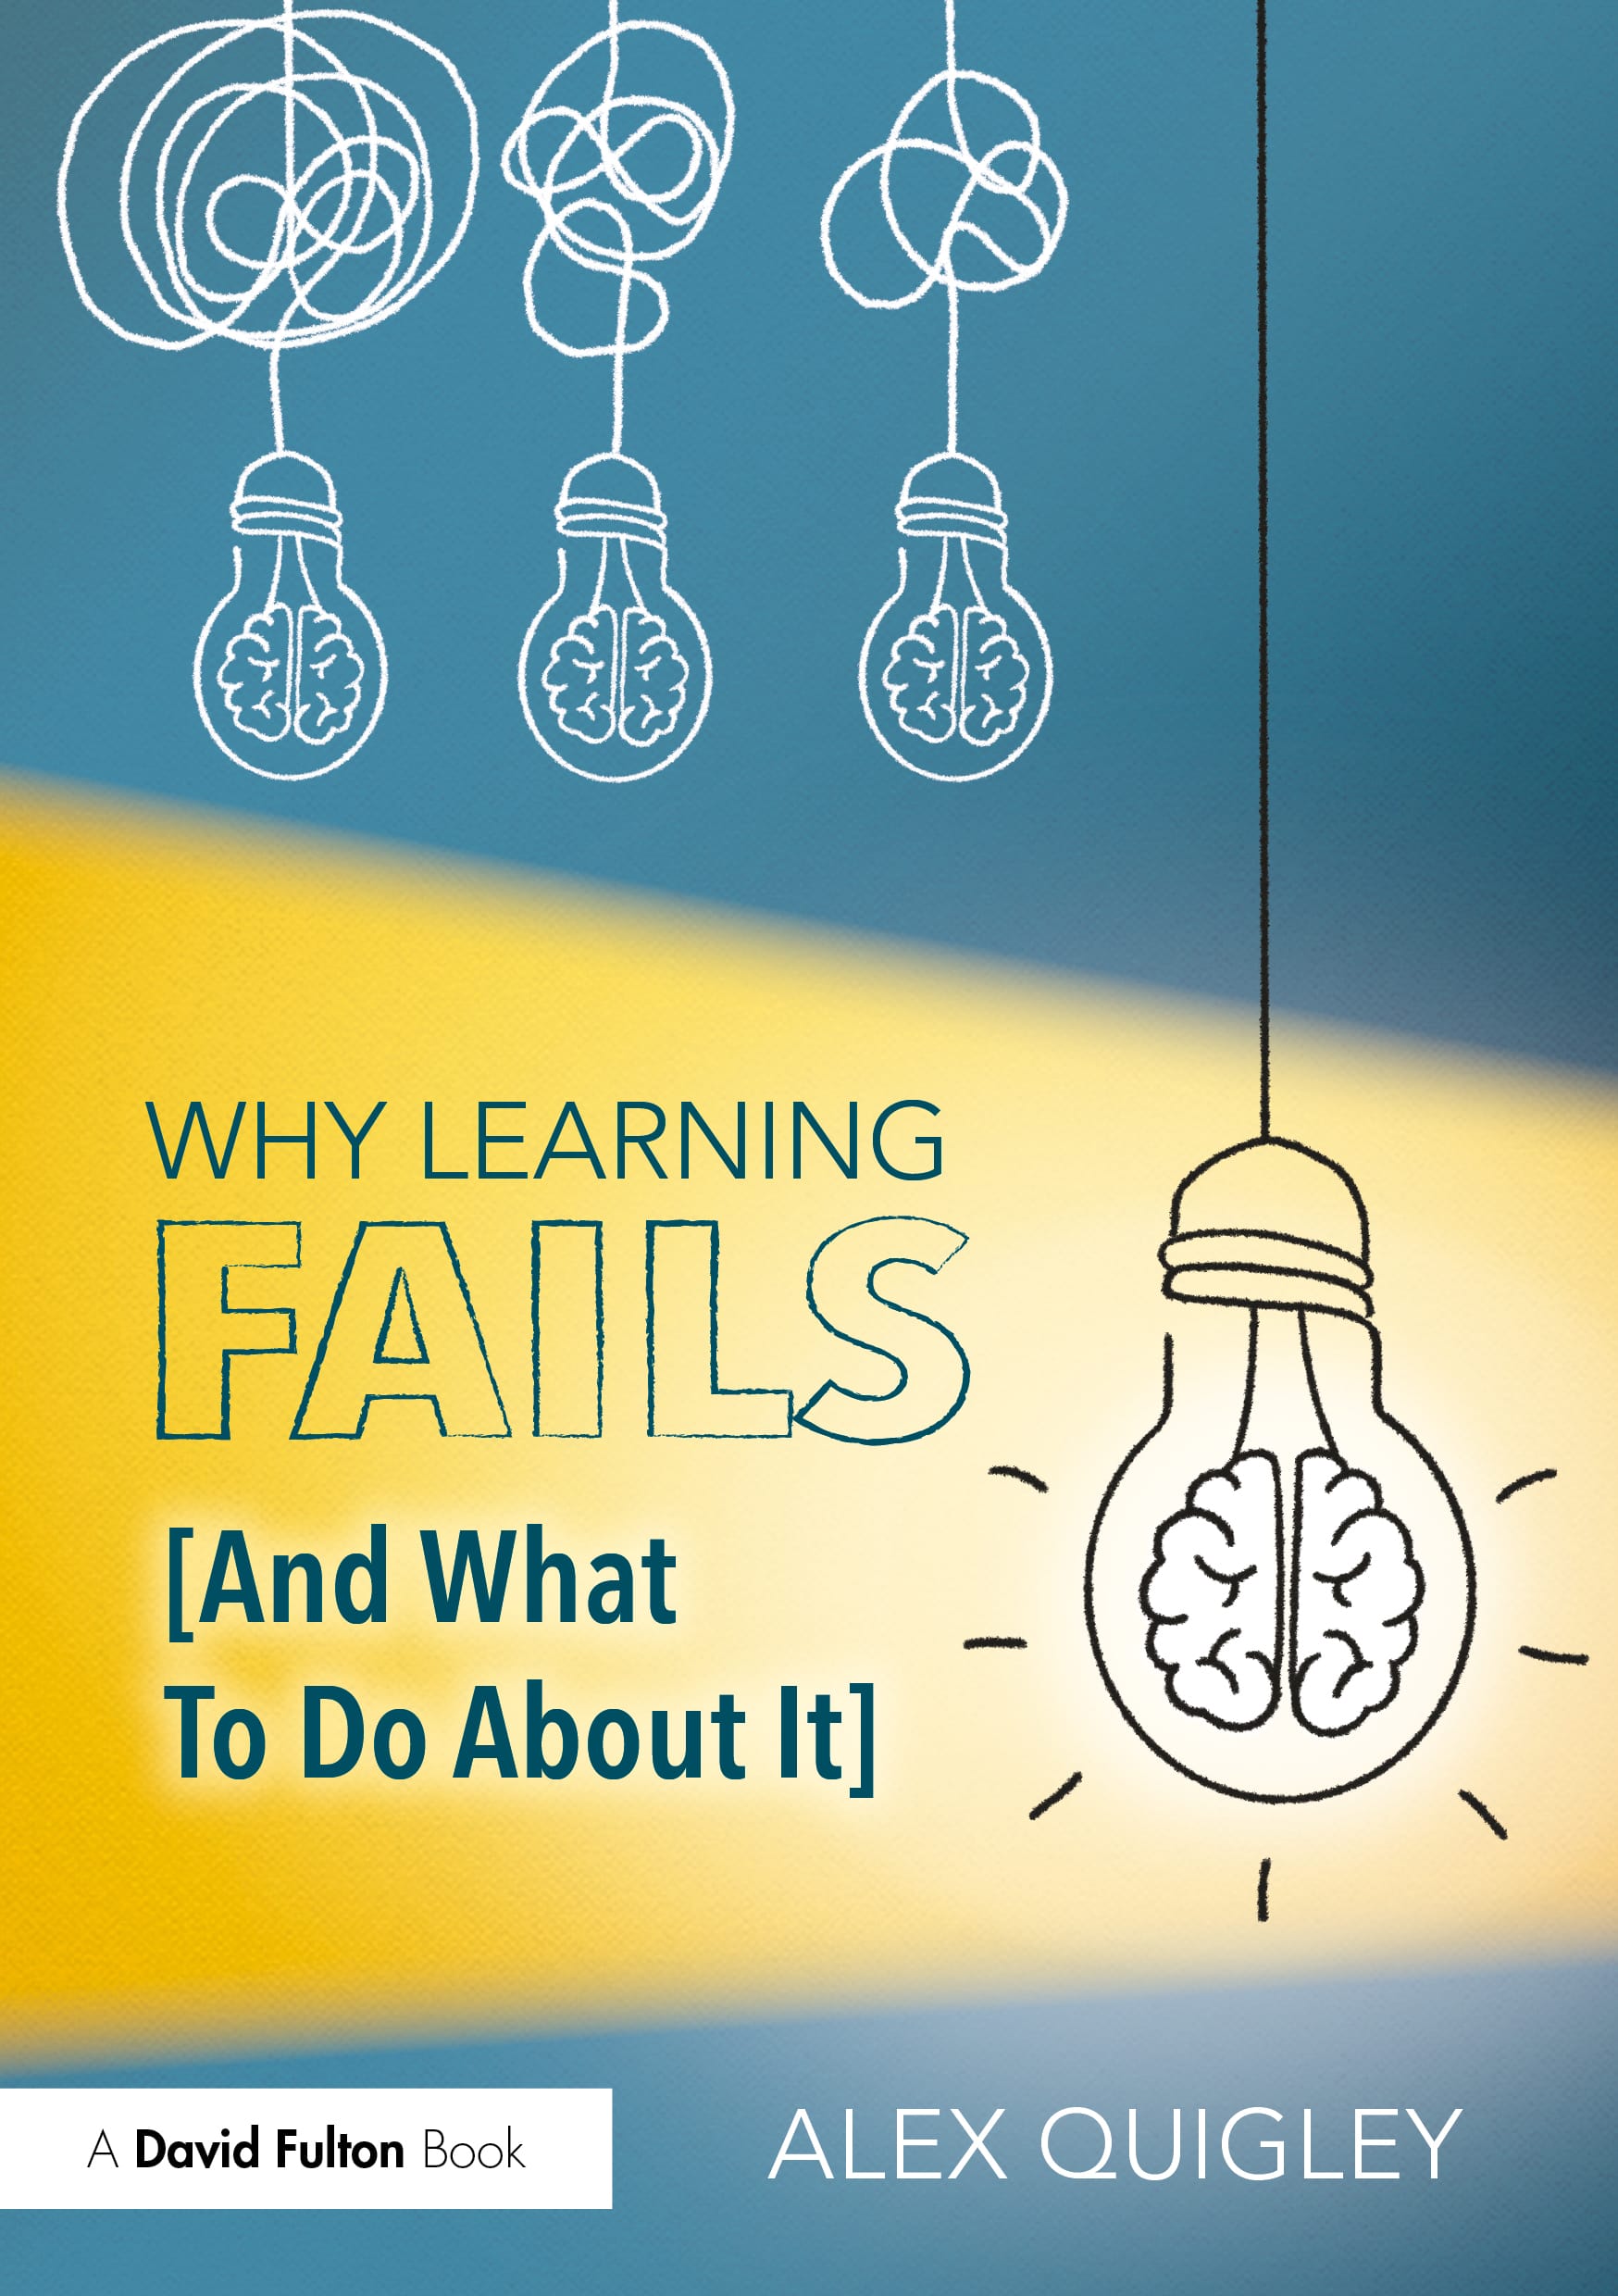 Why Learning Fails - Publication Day